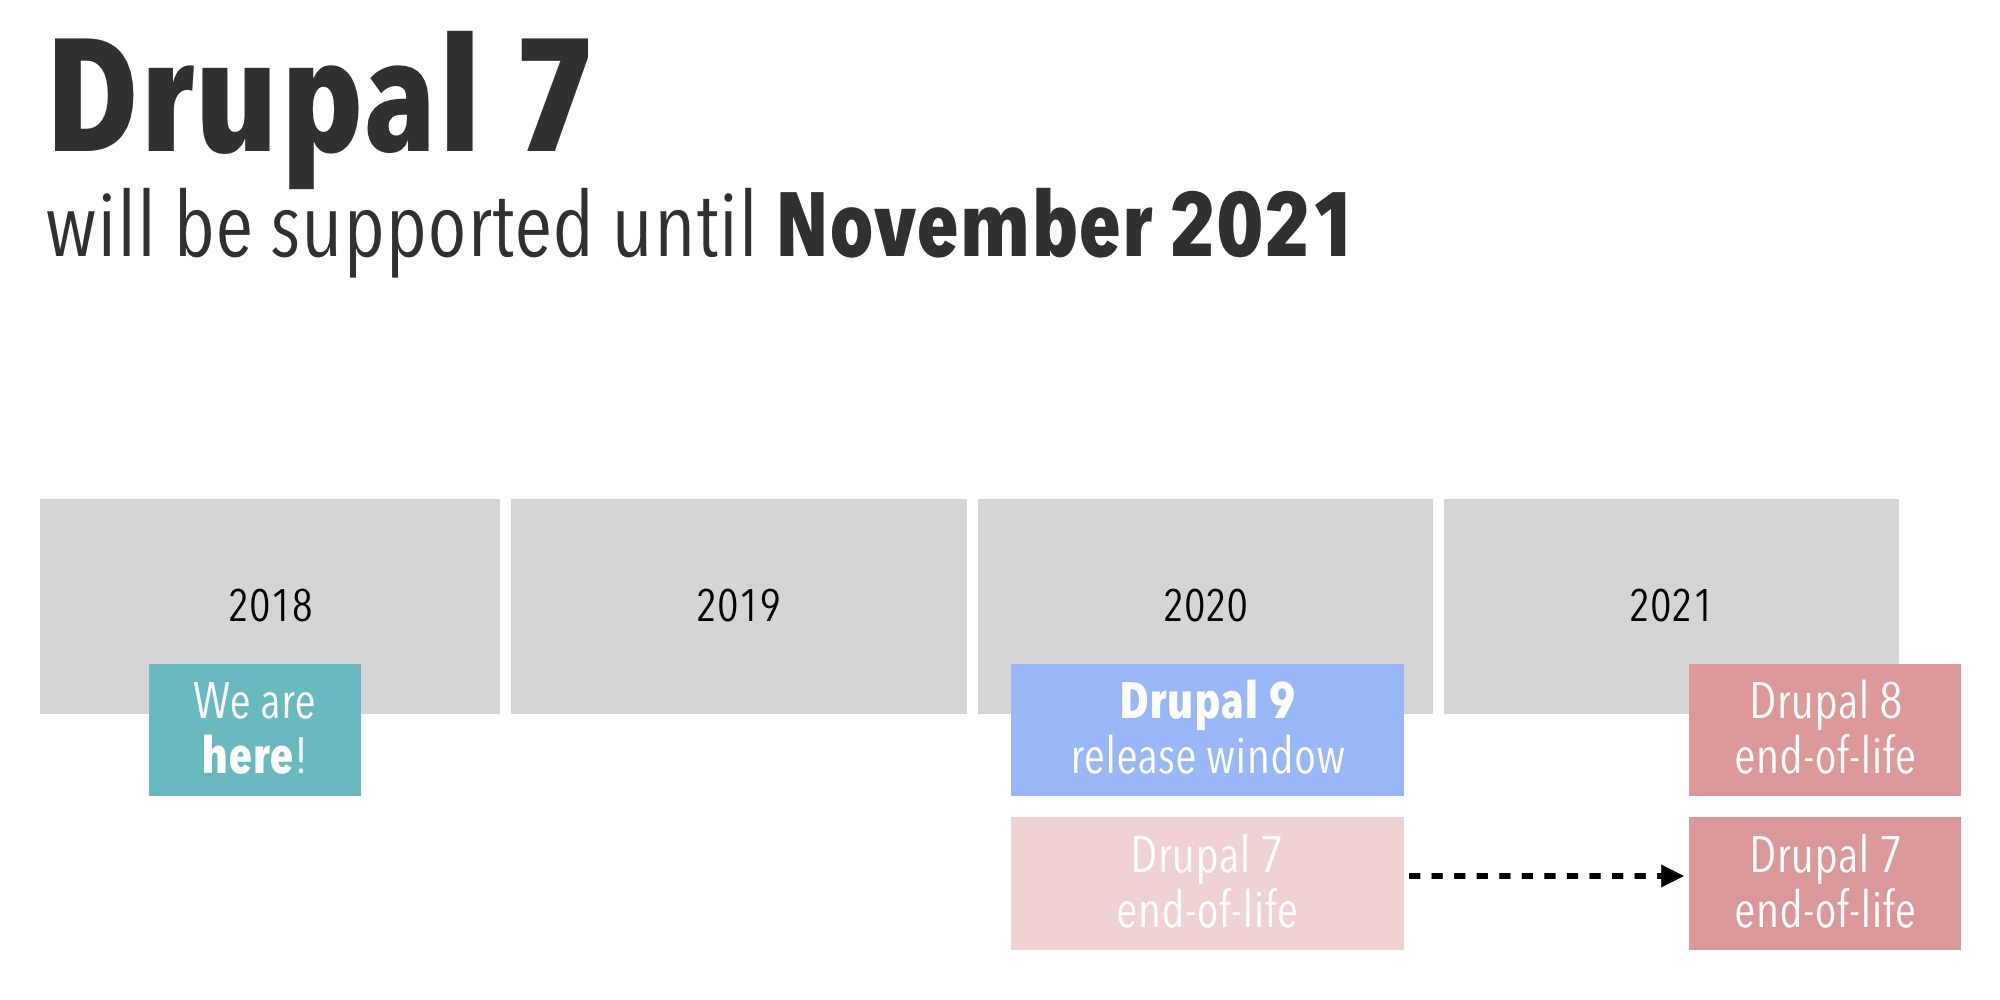 Drupal 7 will be supported until November 2021